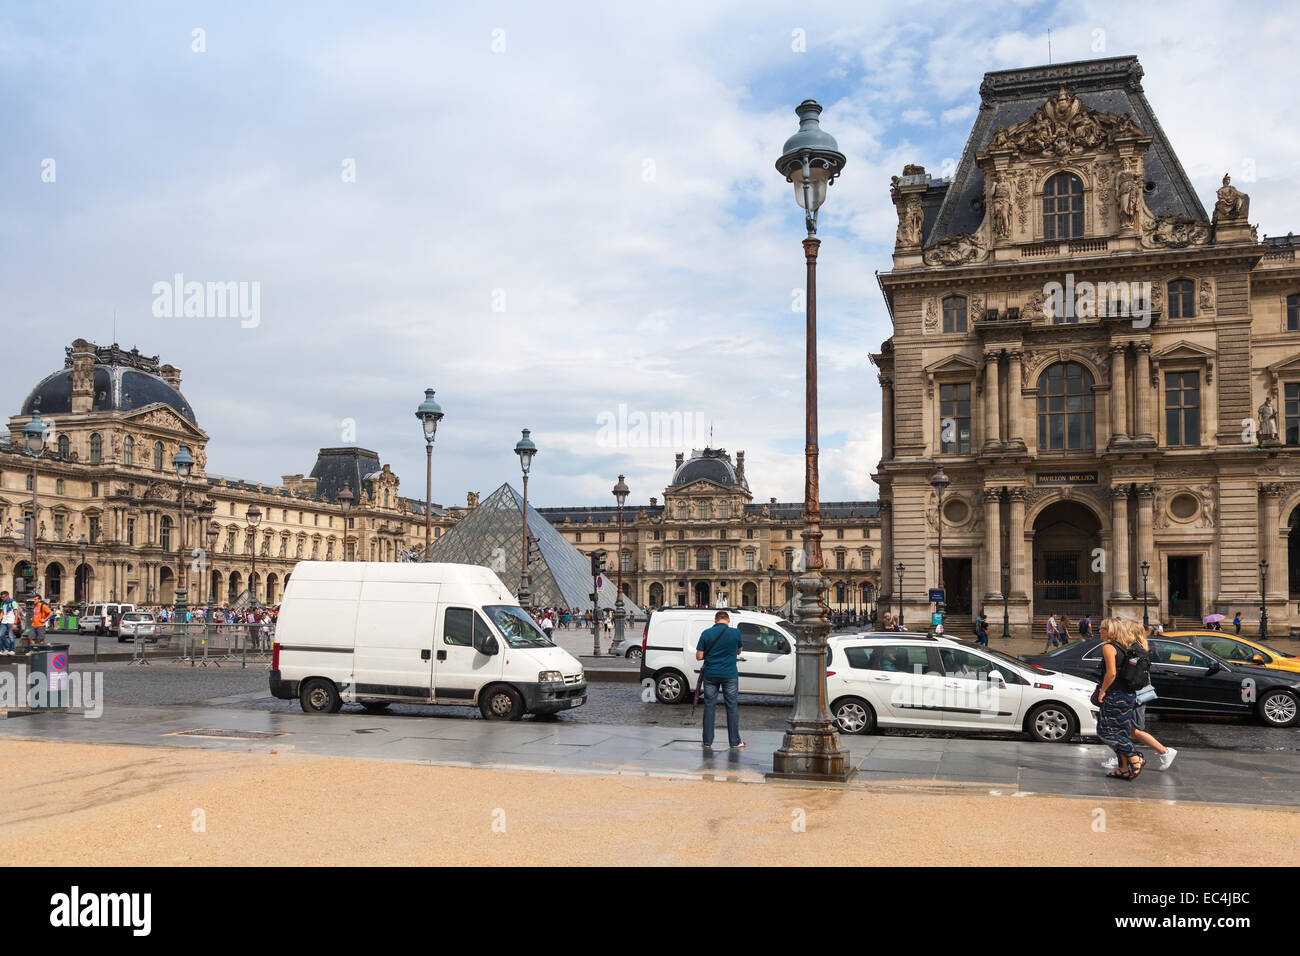 Paris, France - August 07, 2014: Car driving on the street near facade of The Louvre Museum, Paris Stock Photo